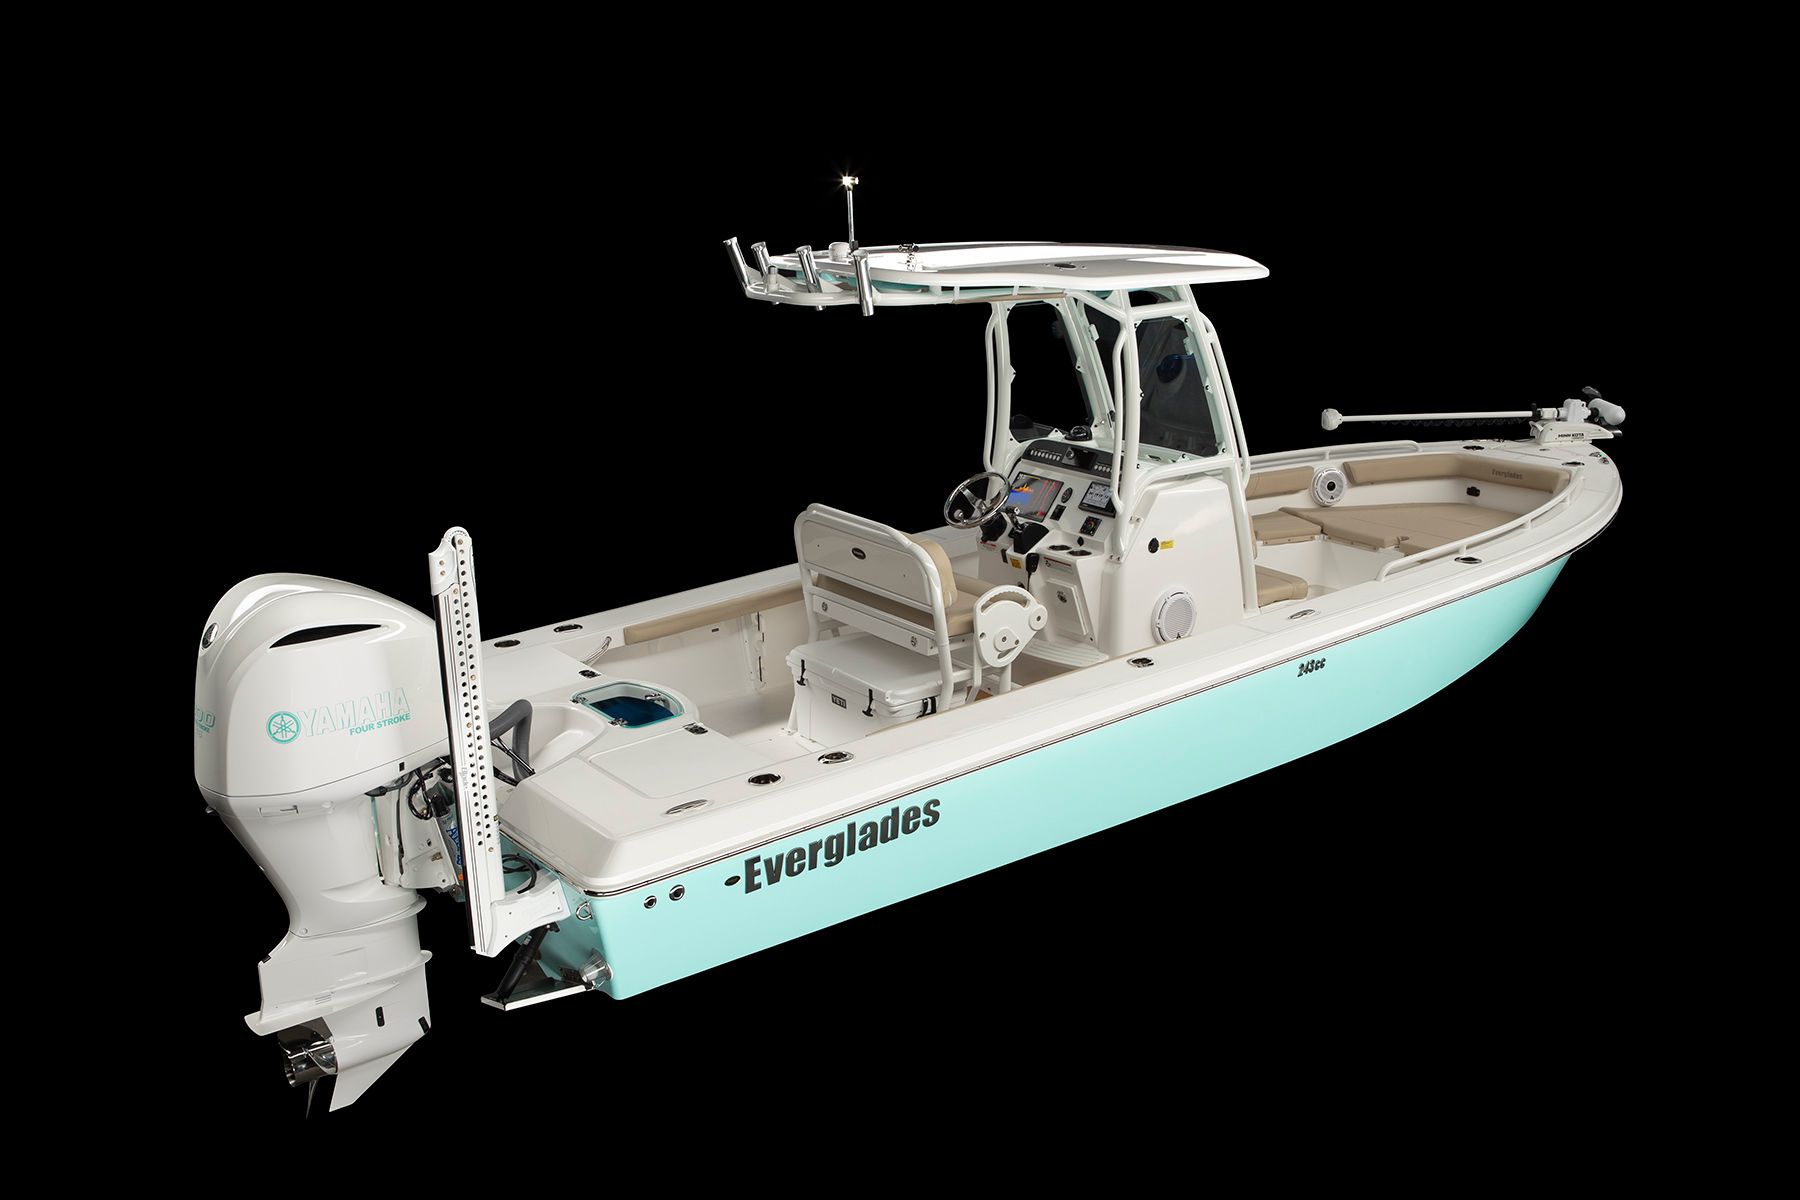 Client: Everglades Boats